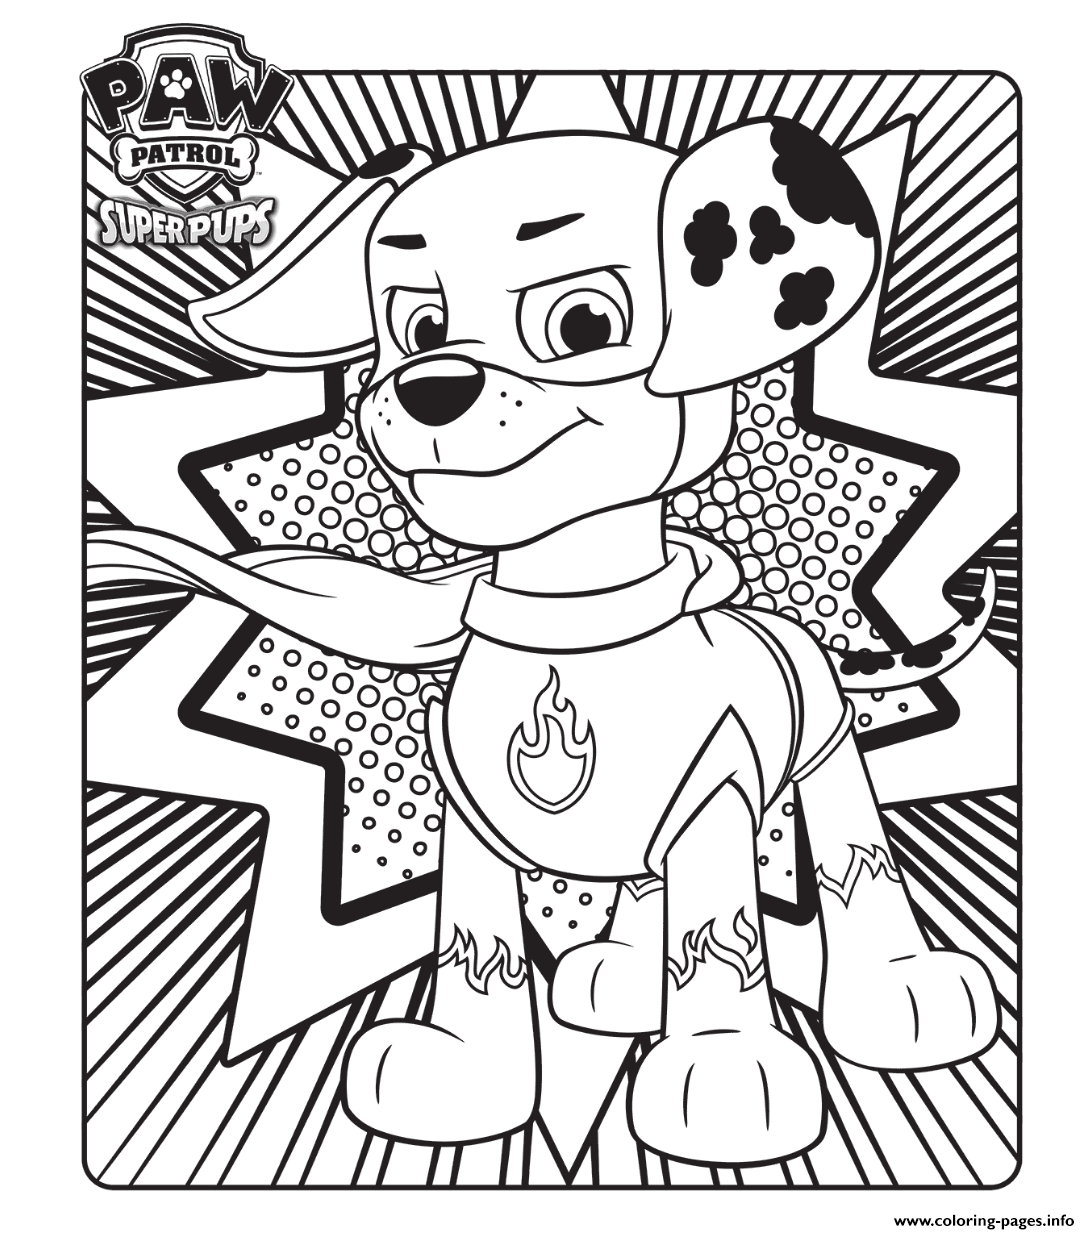 Paw Patrol Super Pups Download coloring pages